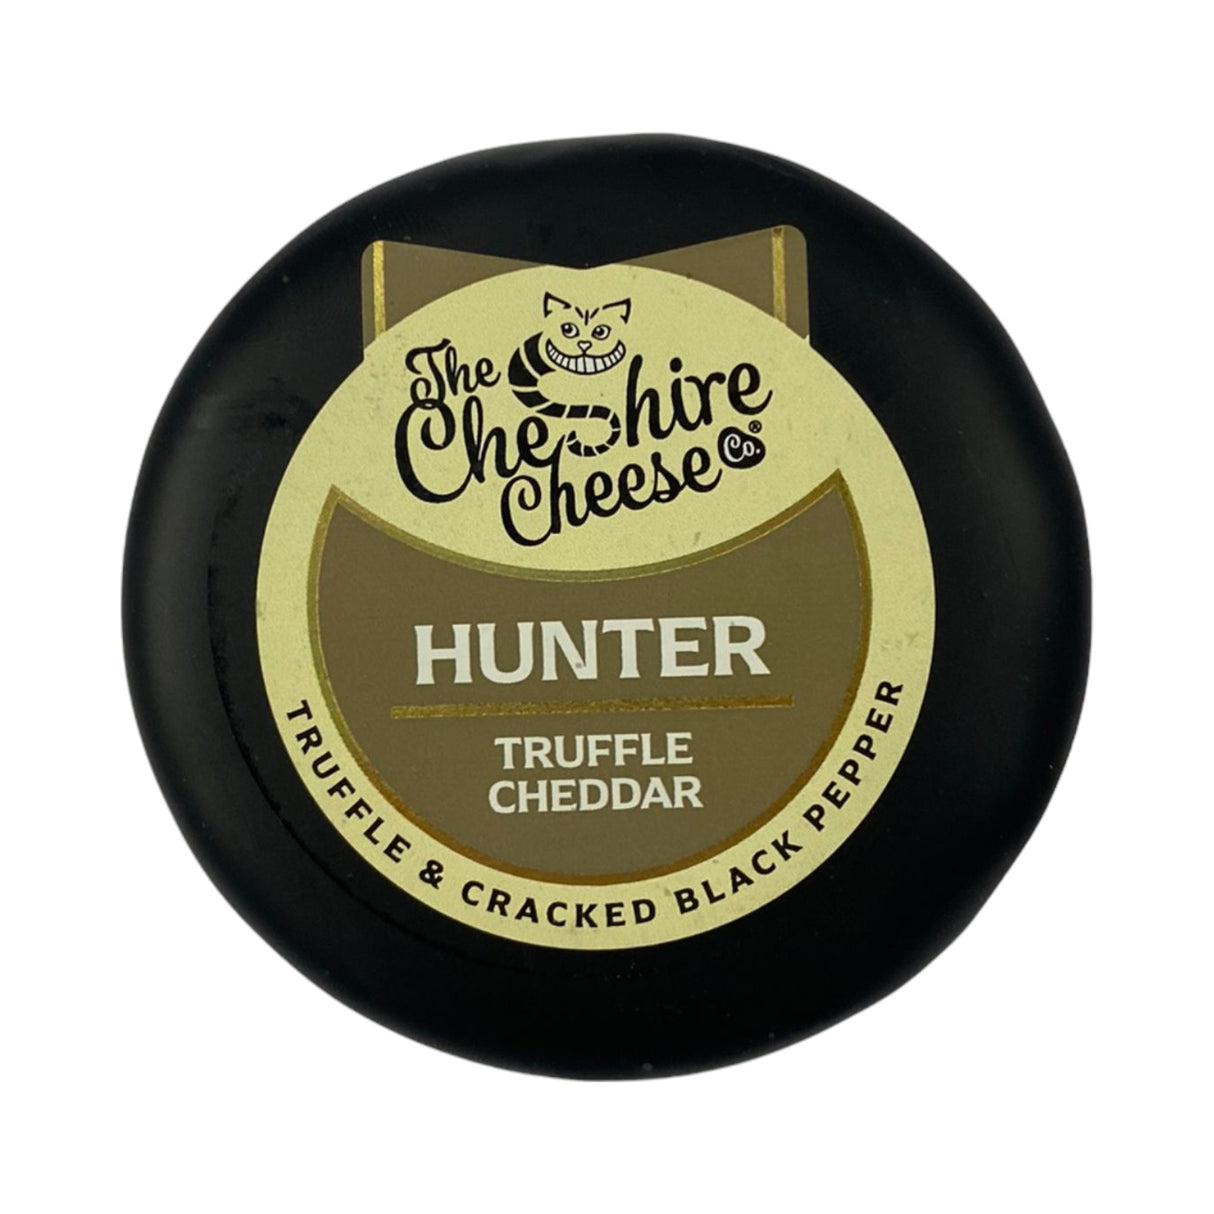 Cheshire Cheese - Hunter Cheddar 200g